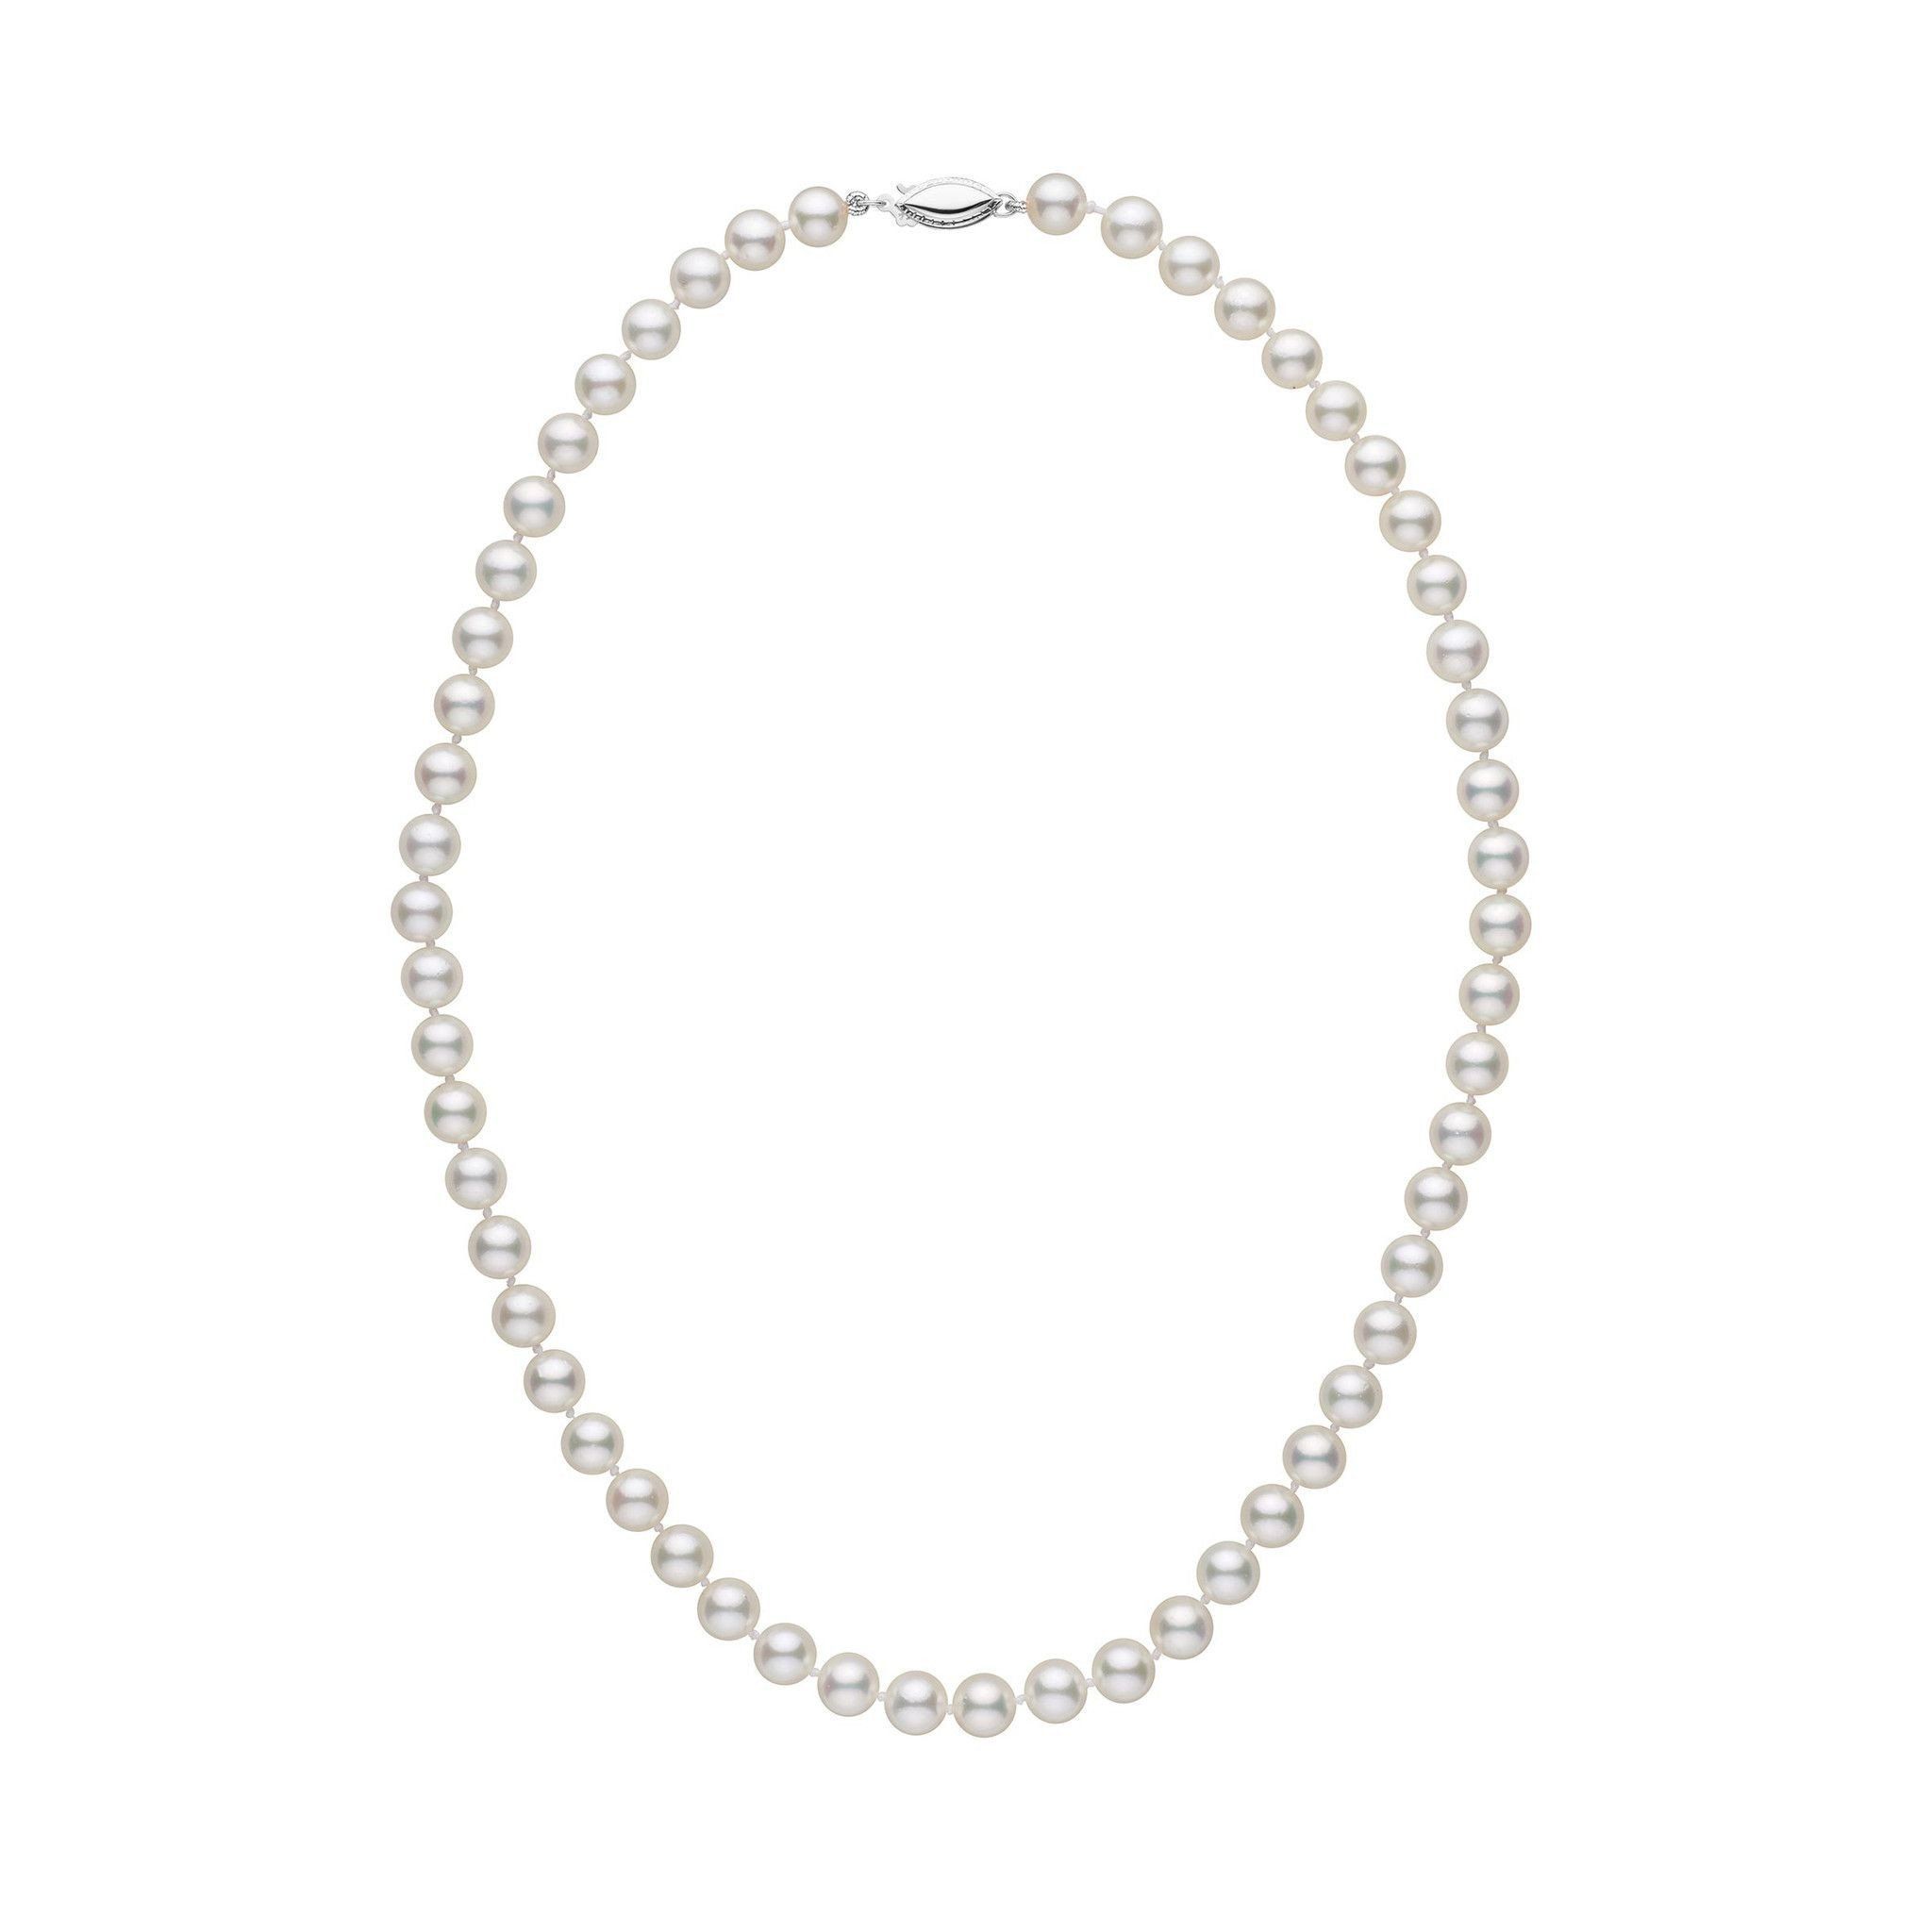 Products 6.5-7.0 mm 16 Inch AA+ White Akoya Pearl Necklace White Gold